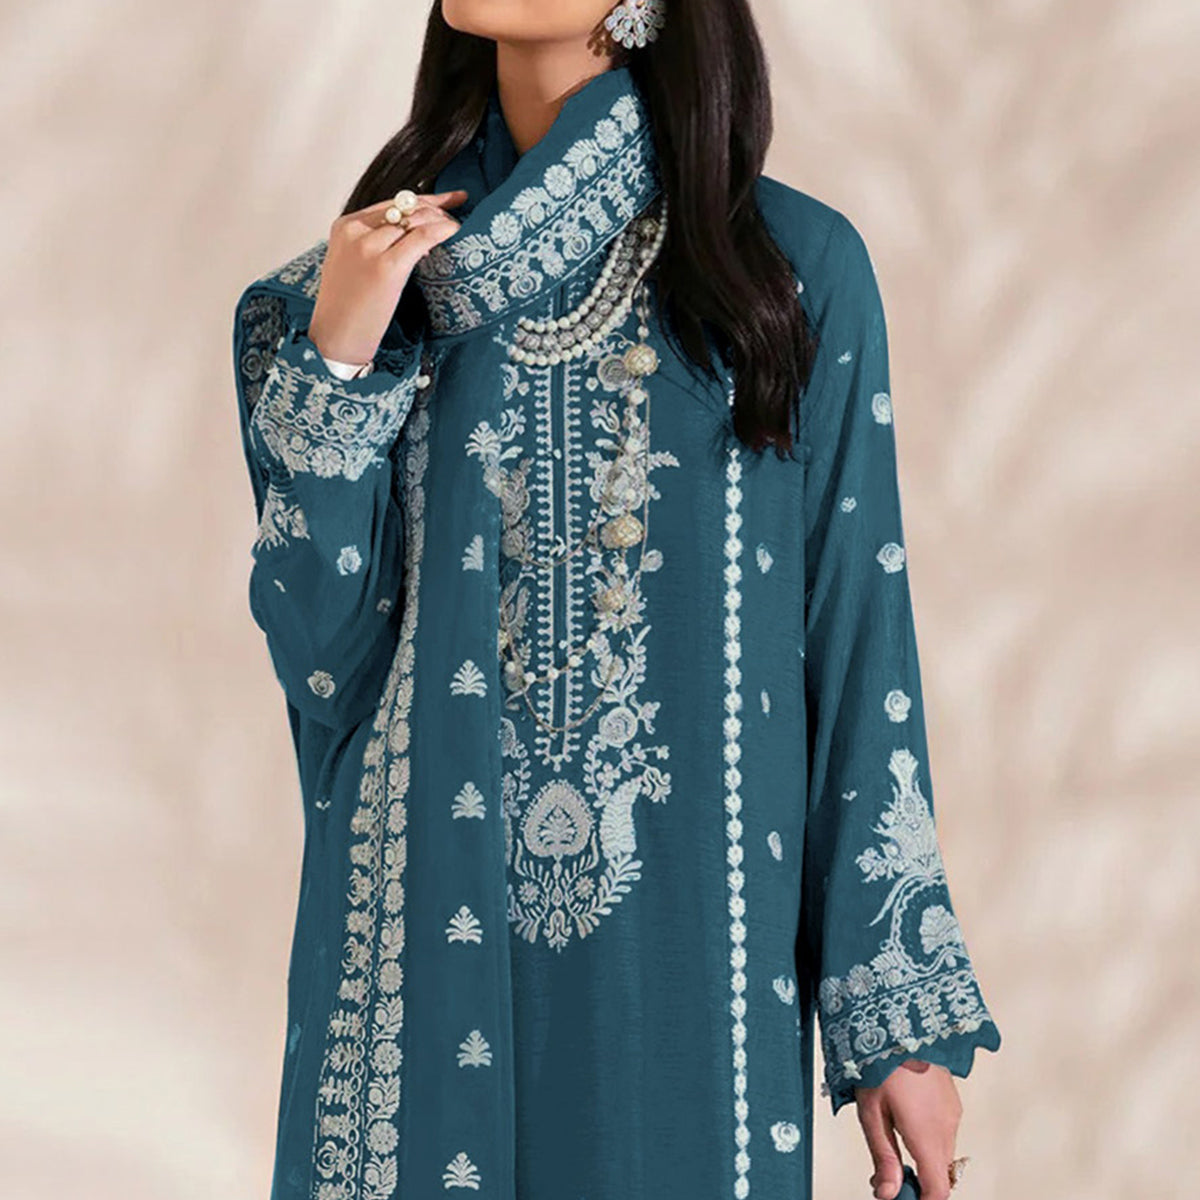 Morpich Floral Embroidered Georgette Semi Stitched Pakistani Suit